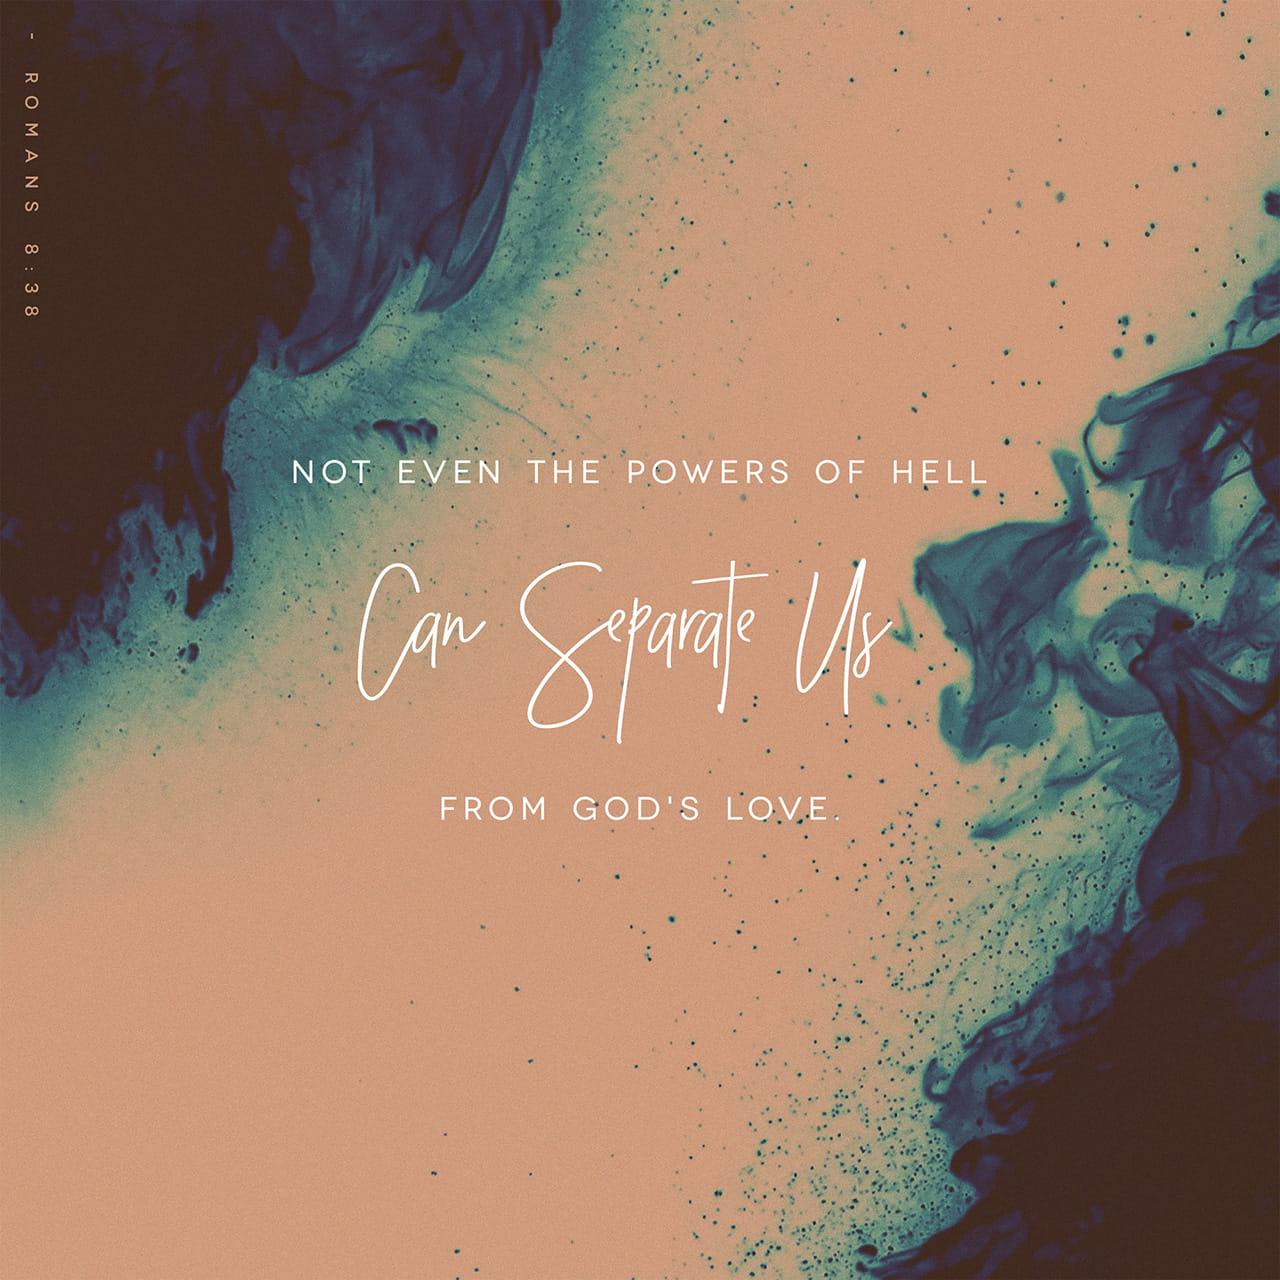 Bible Verse of the Day - day 87 - image 10803 (Romans 8:38-39)